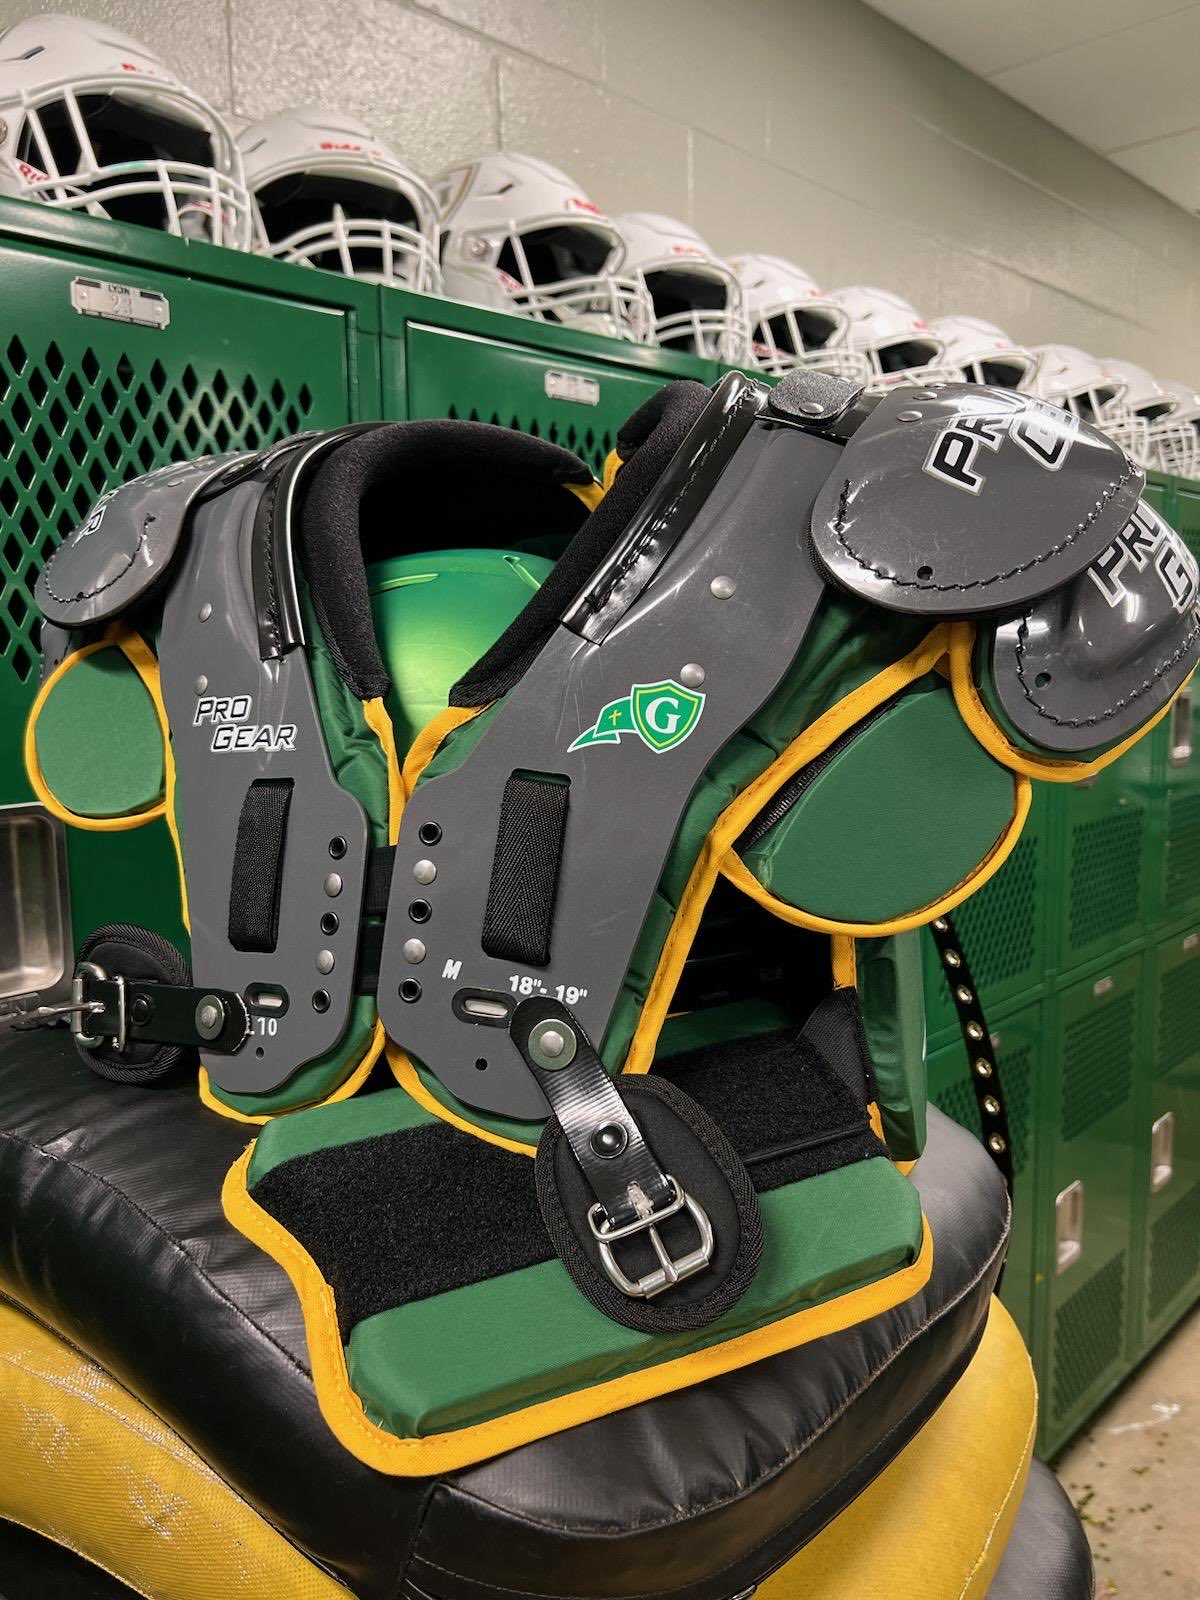 All-Star Catalyst Youth Football Shoulder Pads